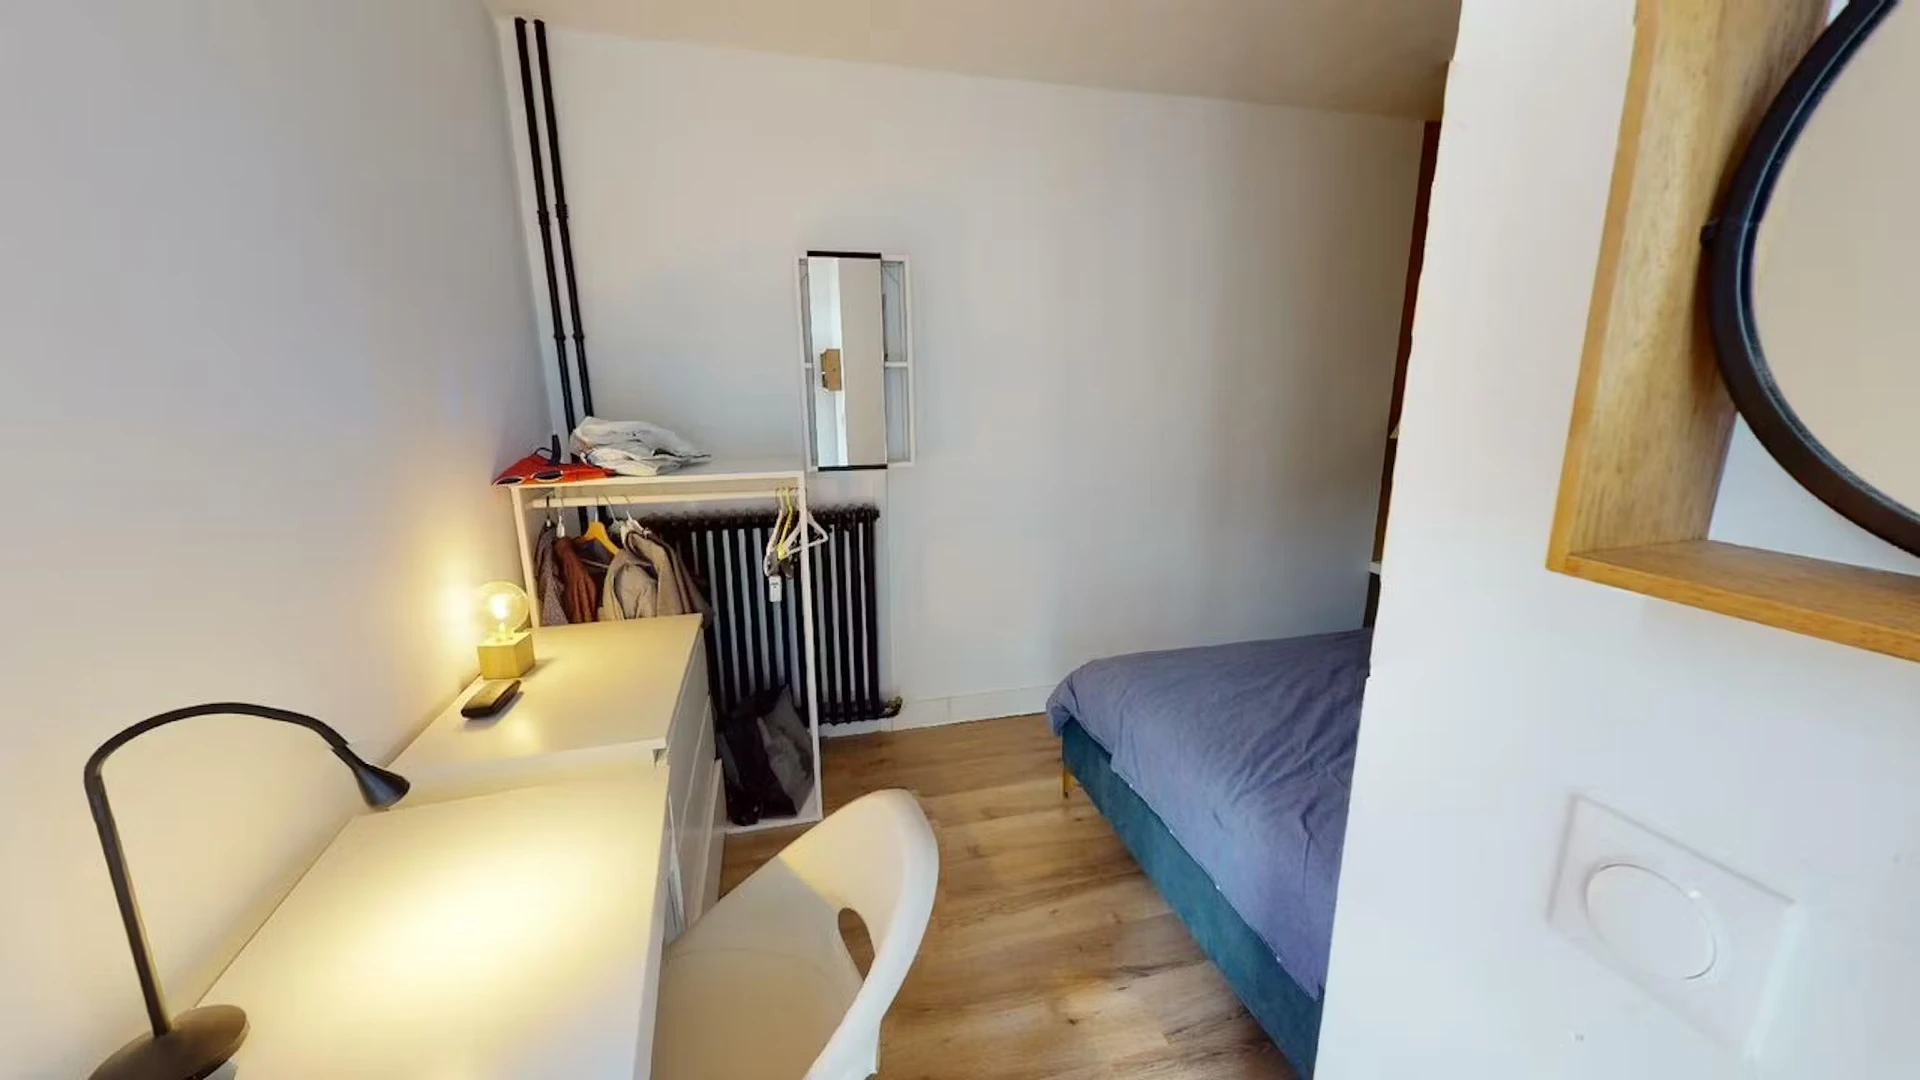 Accommodation in the centre of Poitiers